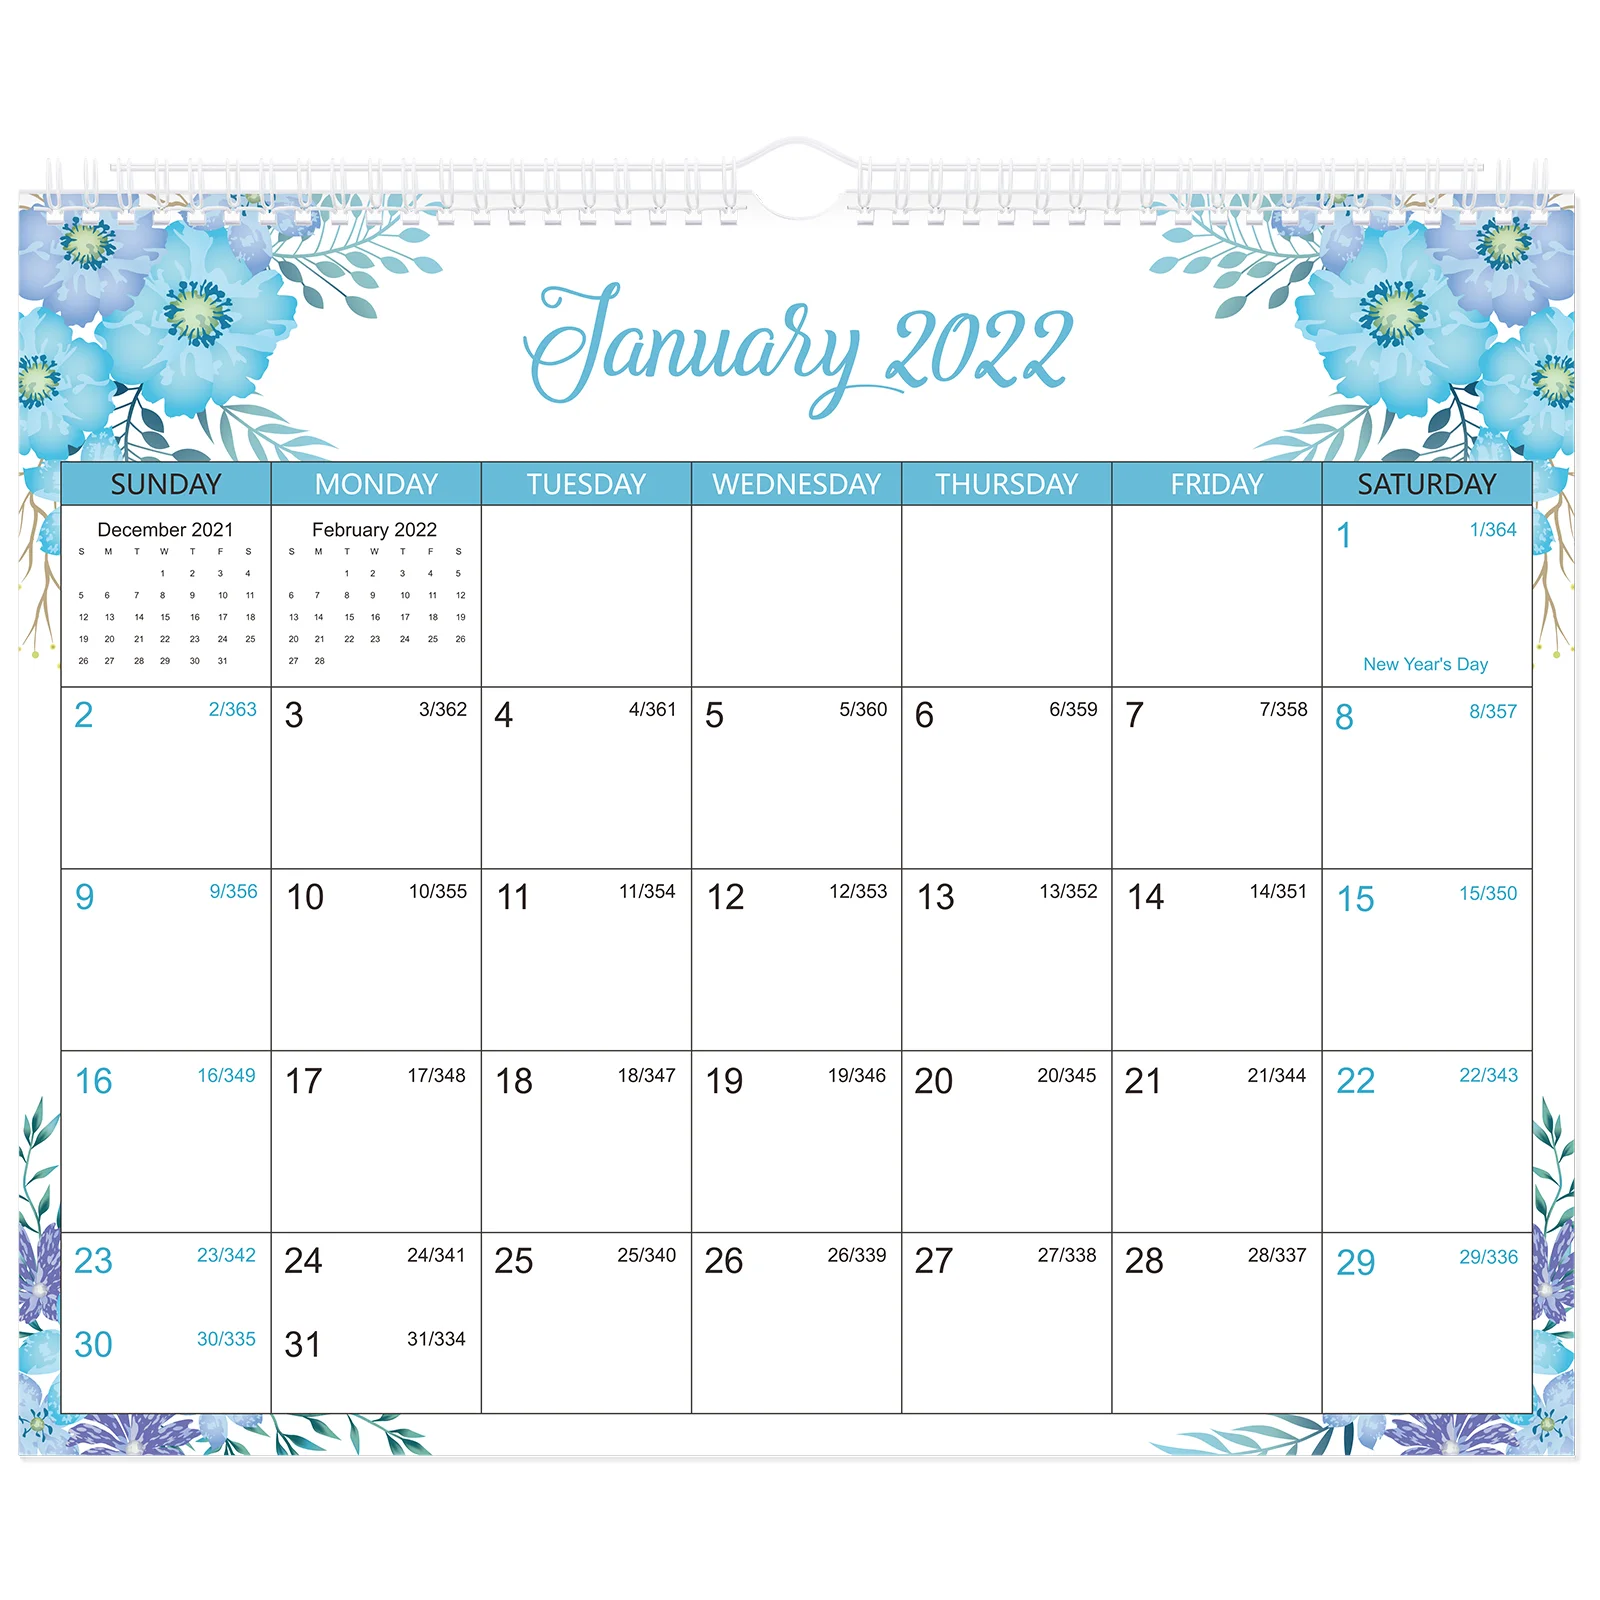 White Board Calendar Calendar Wall 2022-2023 Hanging Large Office Desk 24 Months Big Monthly Planner calendar 2023 desk 2022 standing desktop small monthly table planner office tabletop mini daily wall decorative day